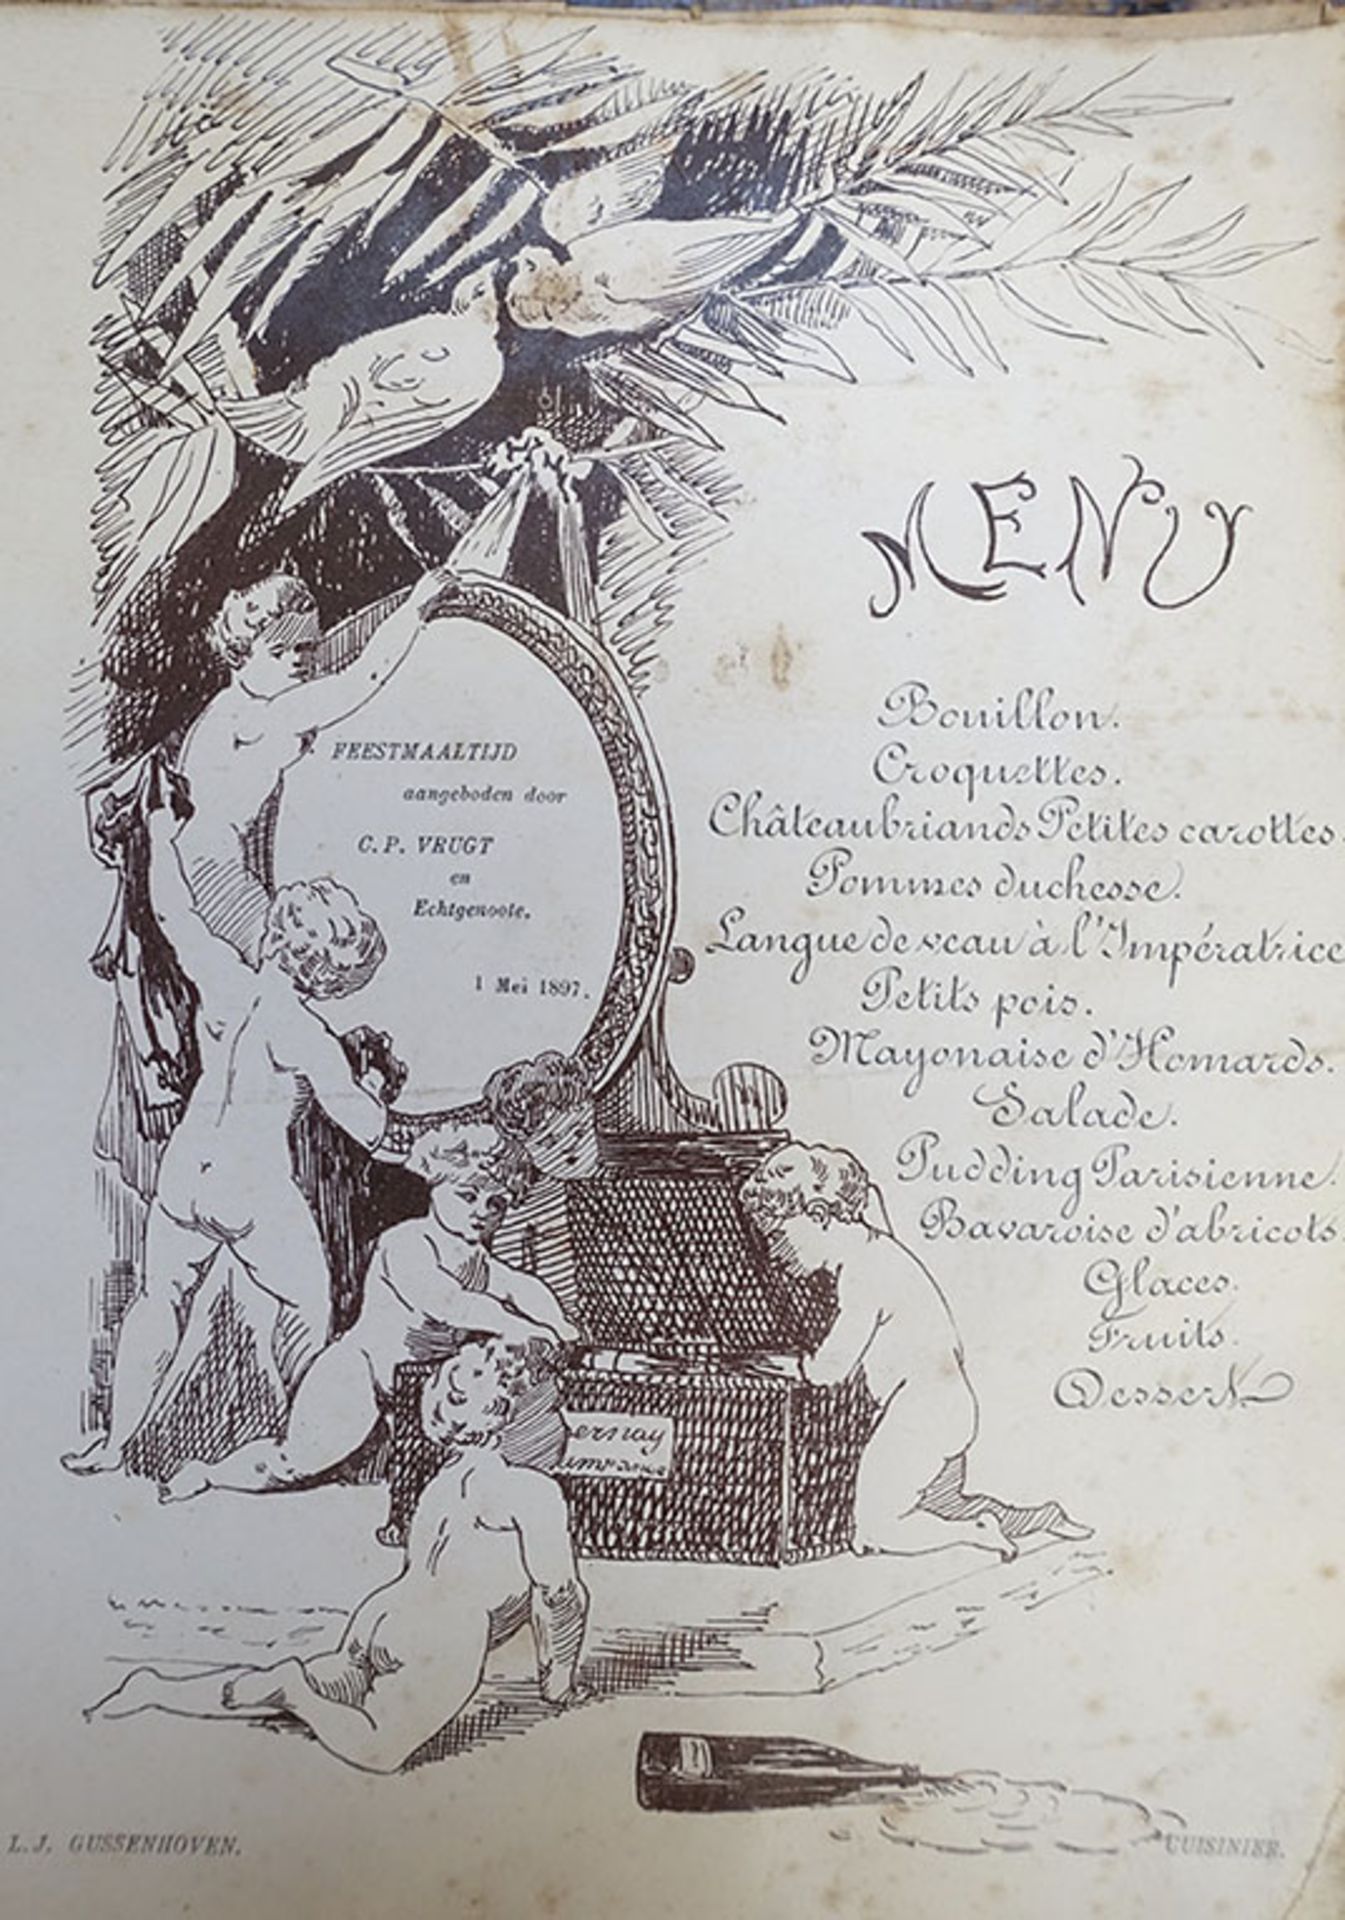 MENU CARDS -- COLLECTION OF ± 125 MENU CARDS from the period 1884-1901 'composed' by Lambertus - Image 4 of 4